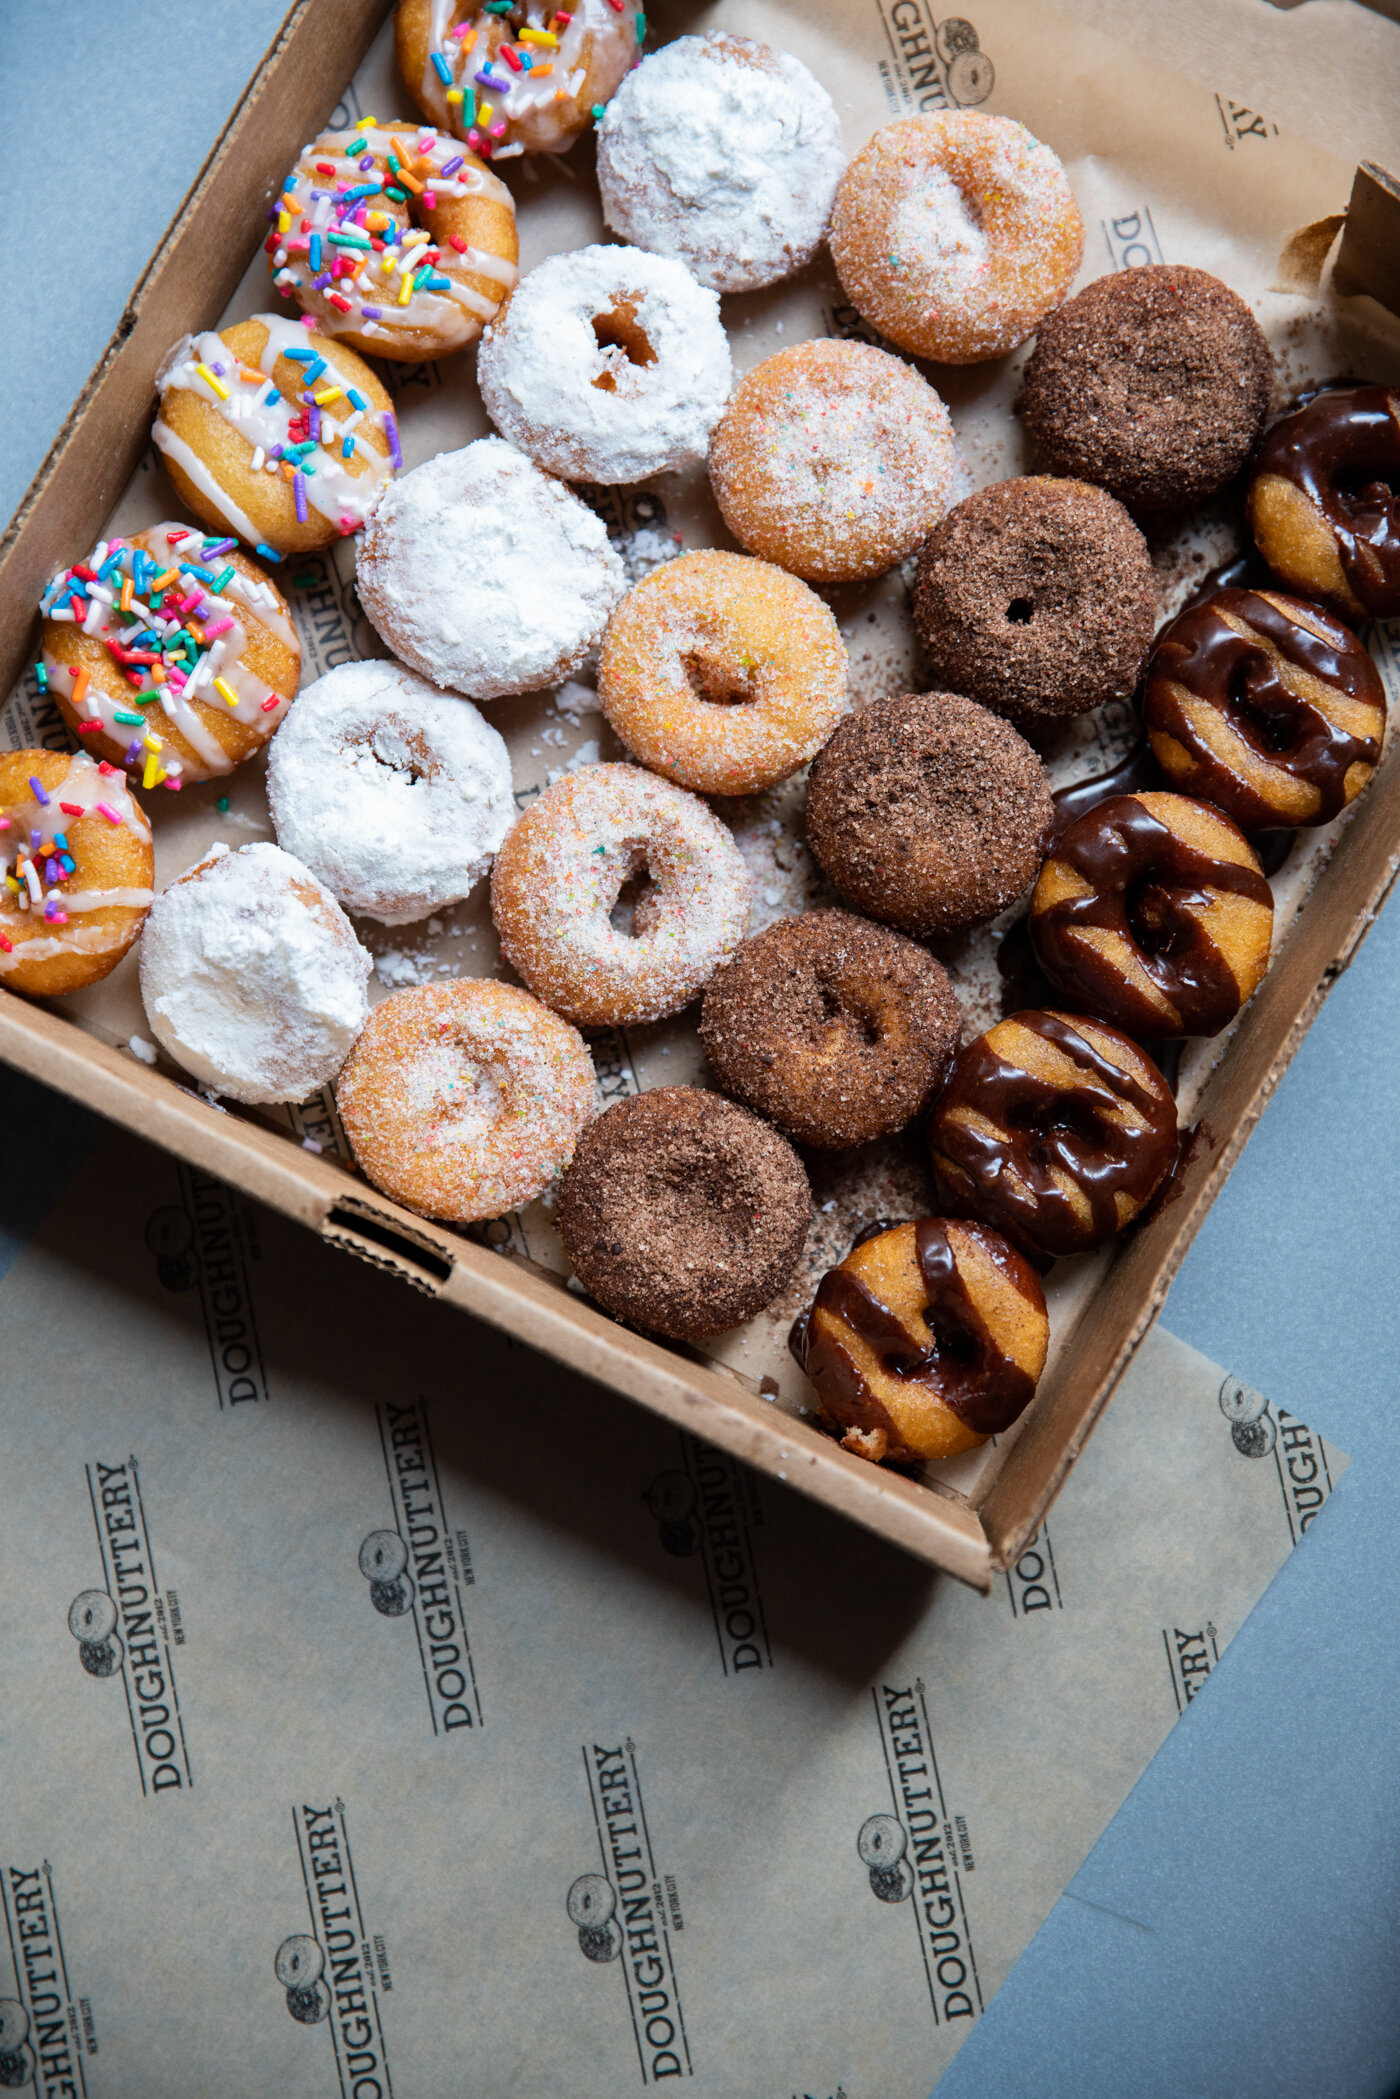 box of varying types of doughnuts, some with sprinkles, some with sugar, some with powder